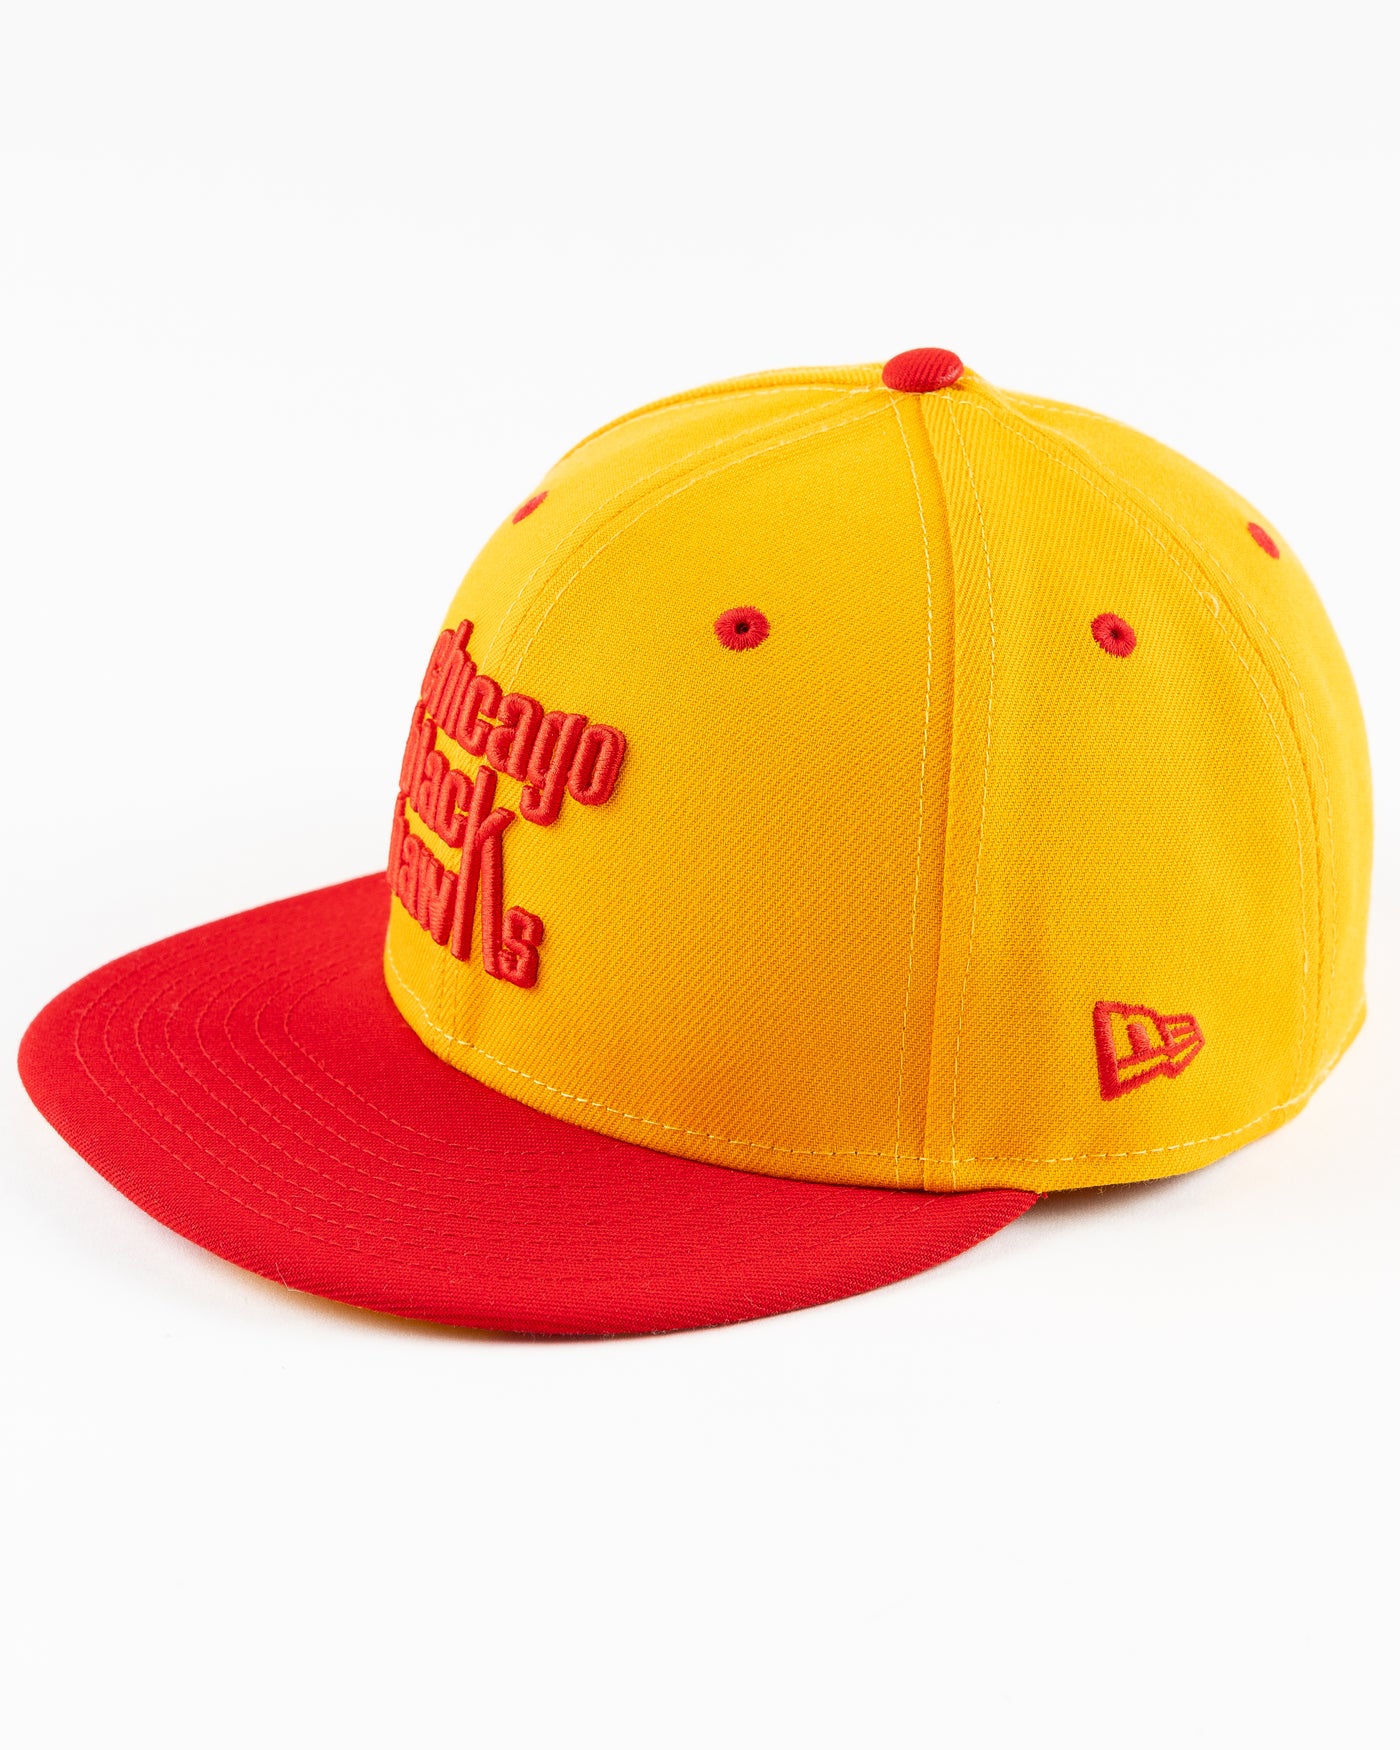 yellow and red New Era fitted cap with Chicago Blackhawks wordmark on front - left angle lay flat